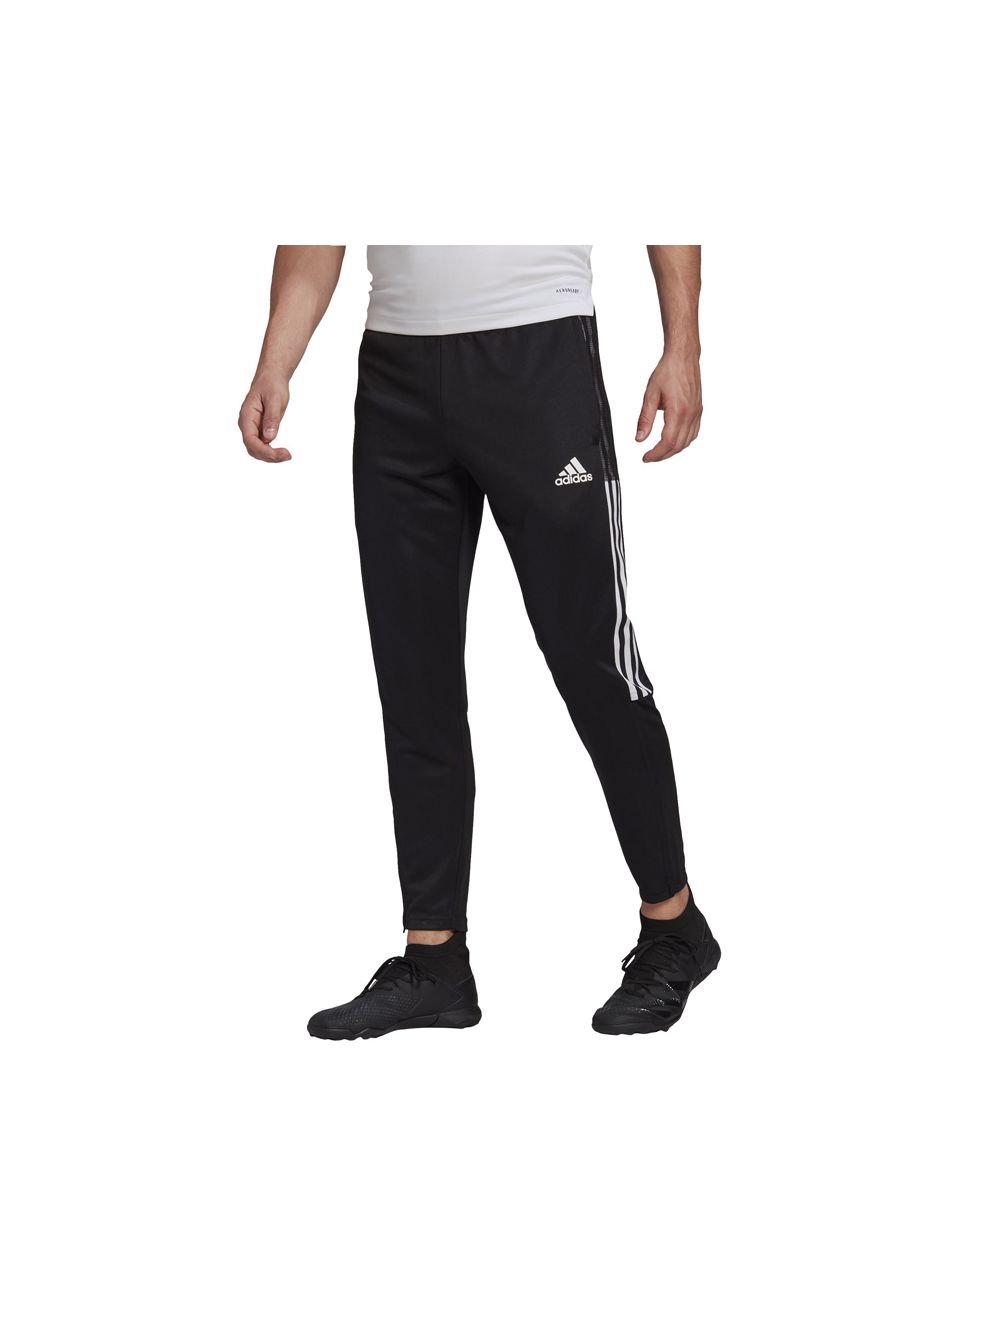 ADIDAS PERFORMANCE Slim fit Workout Pants 'Fc Bayern Tiro 23 Training  Bottoms' in Orange, Coral | ABOUT YOU